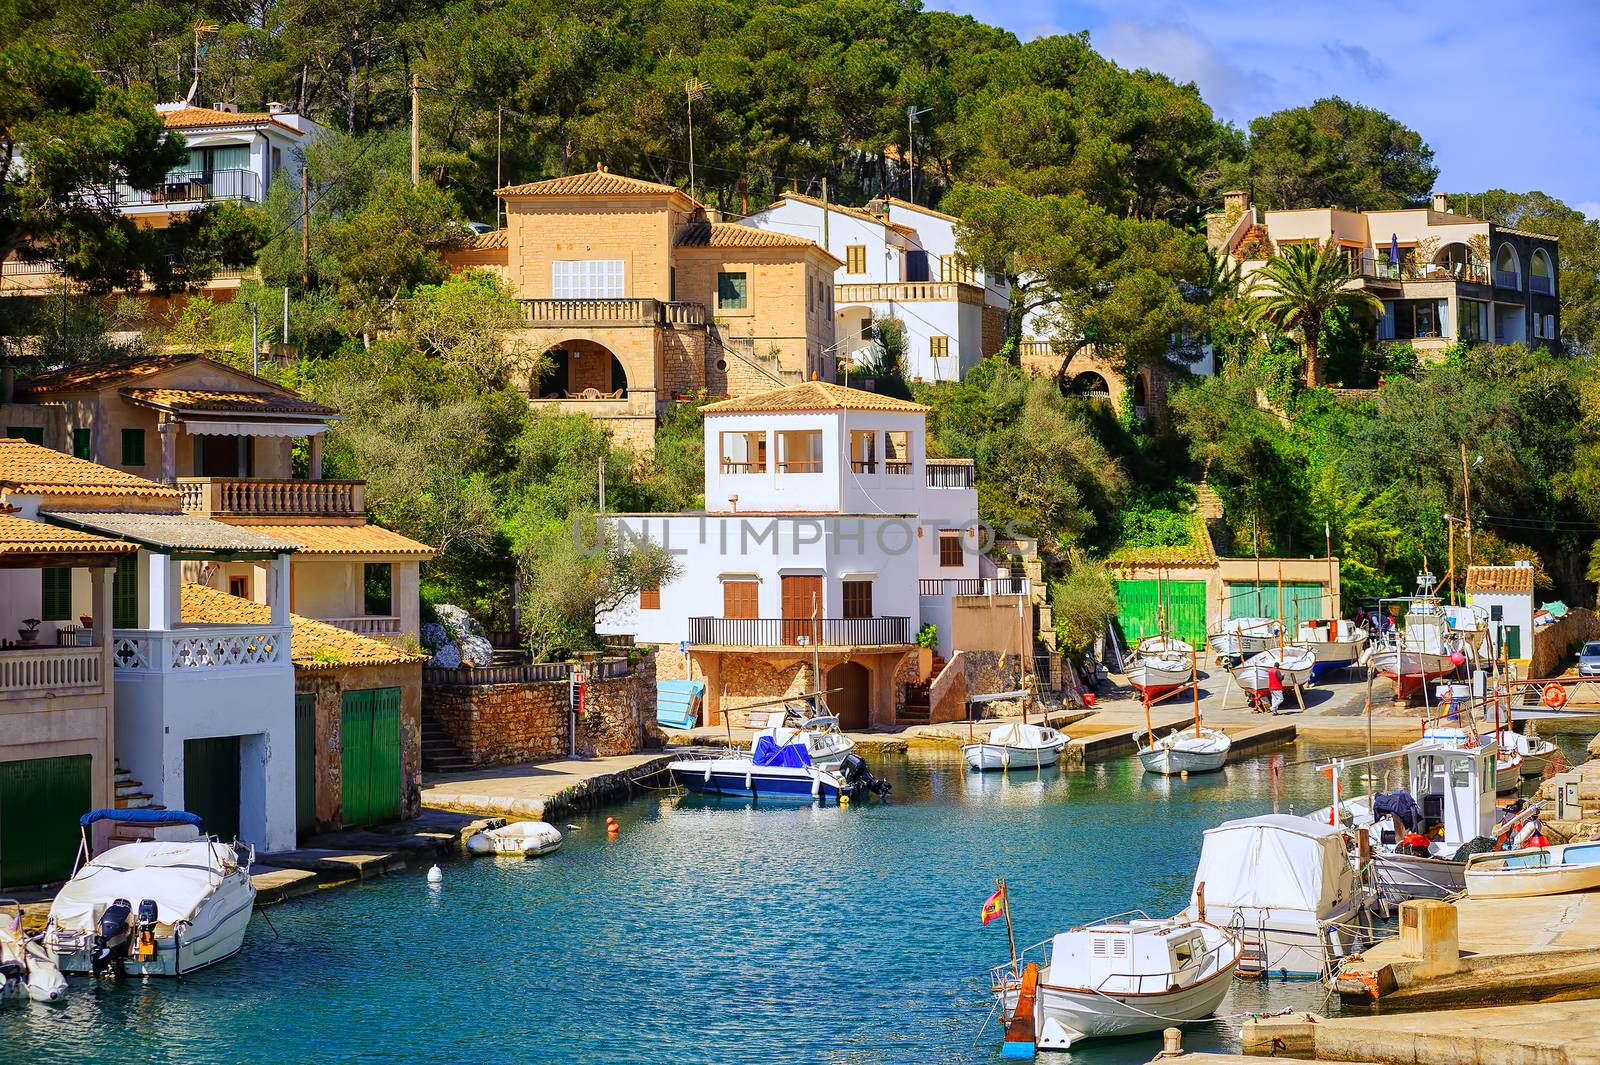 Cala Figuera, attractive little town on southern coast of Mallorca island, Spain